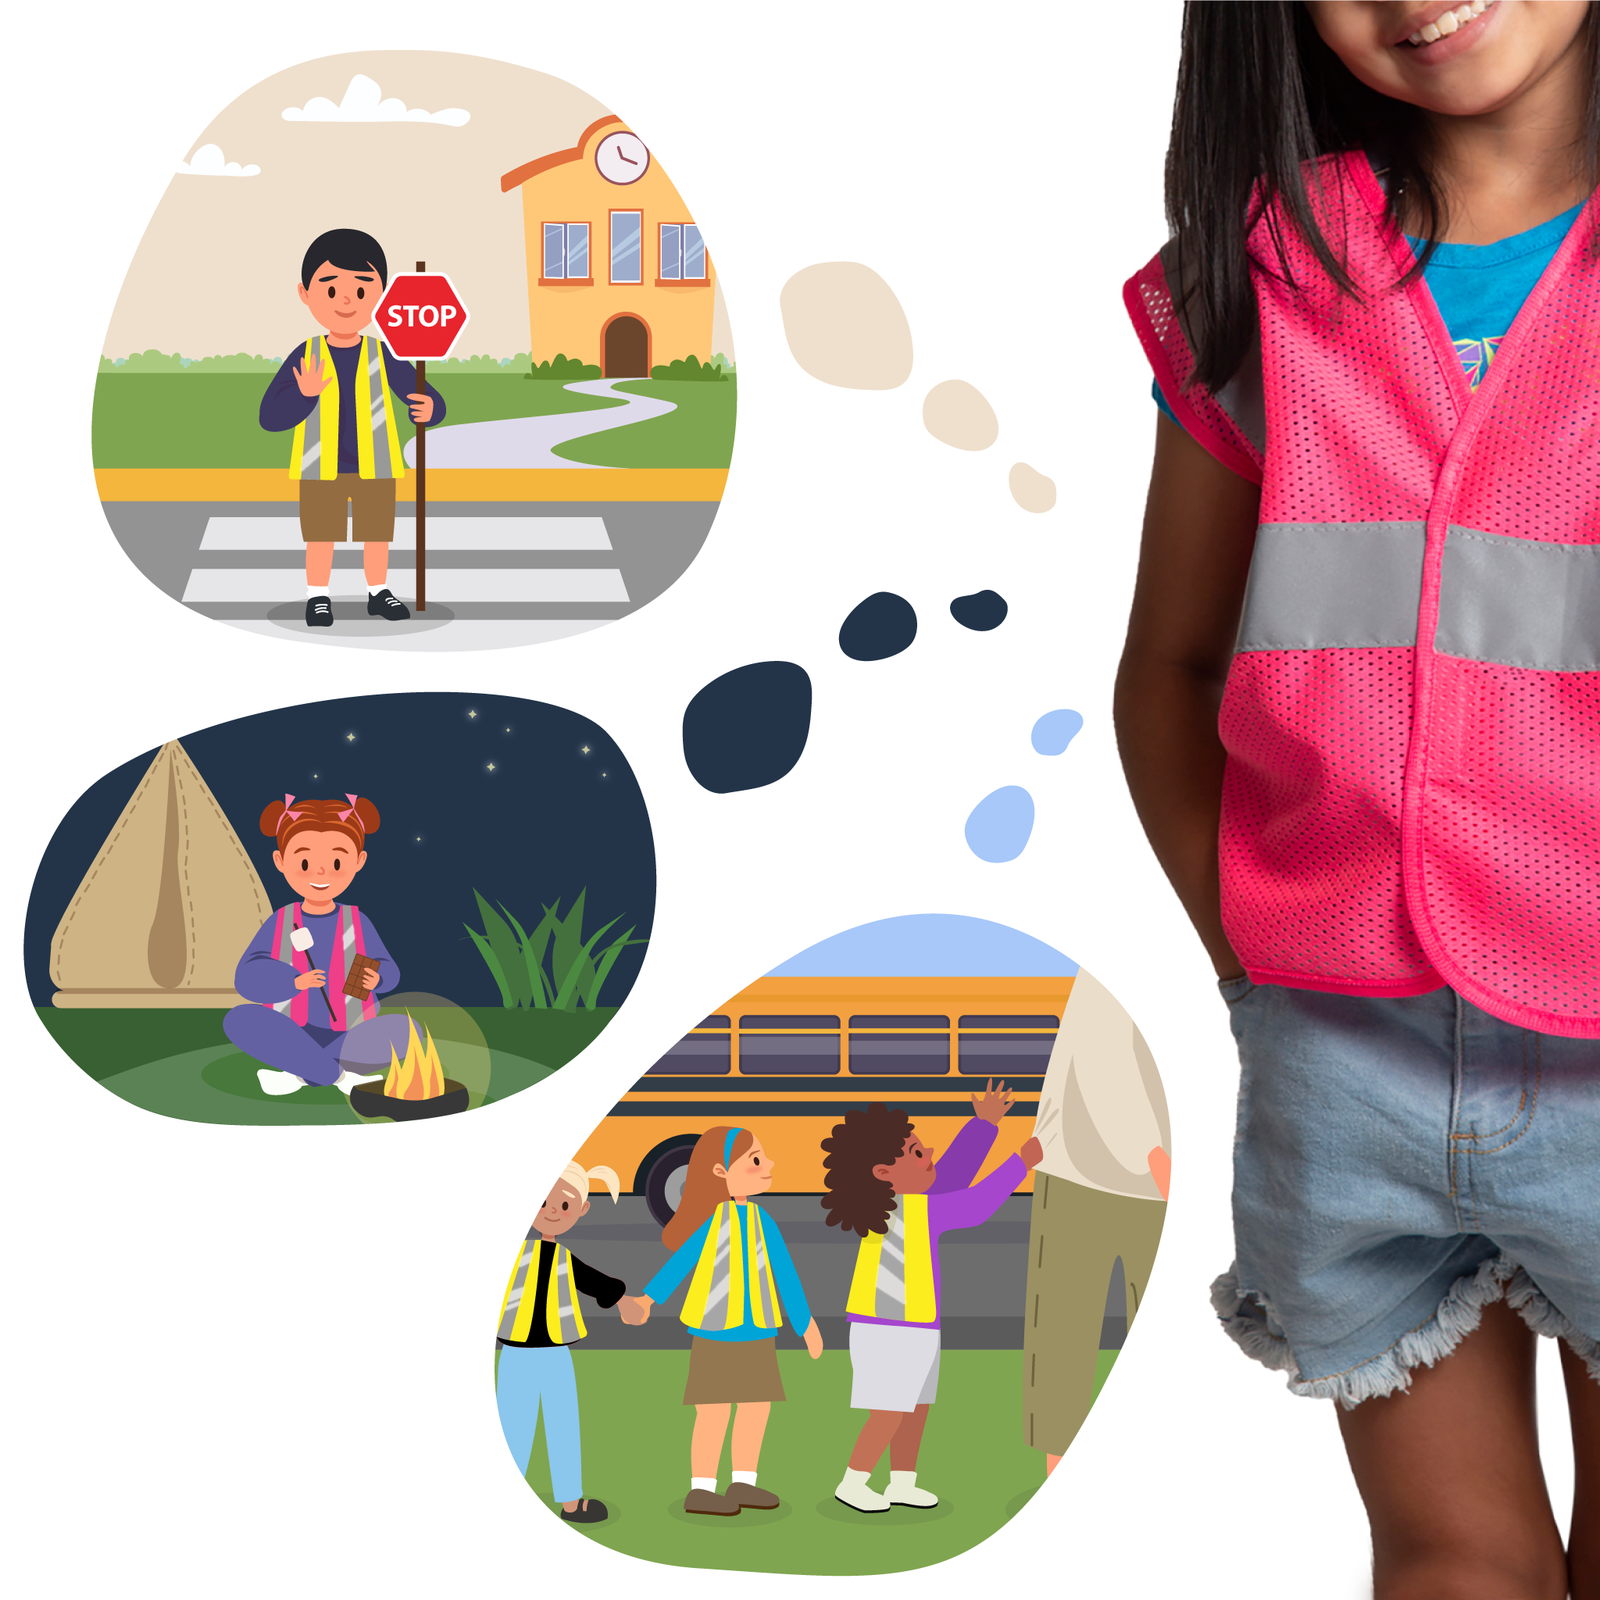 Pink safety vest for girls with reflective strips for school and outdoor activities